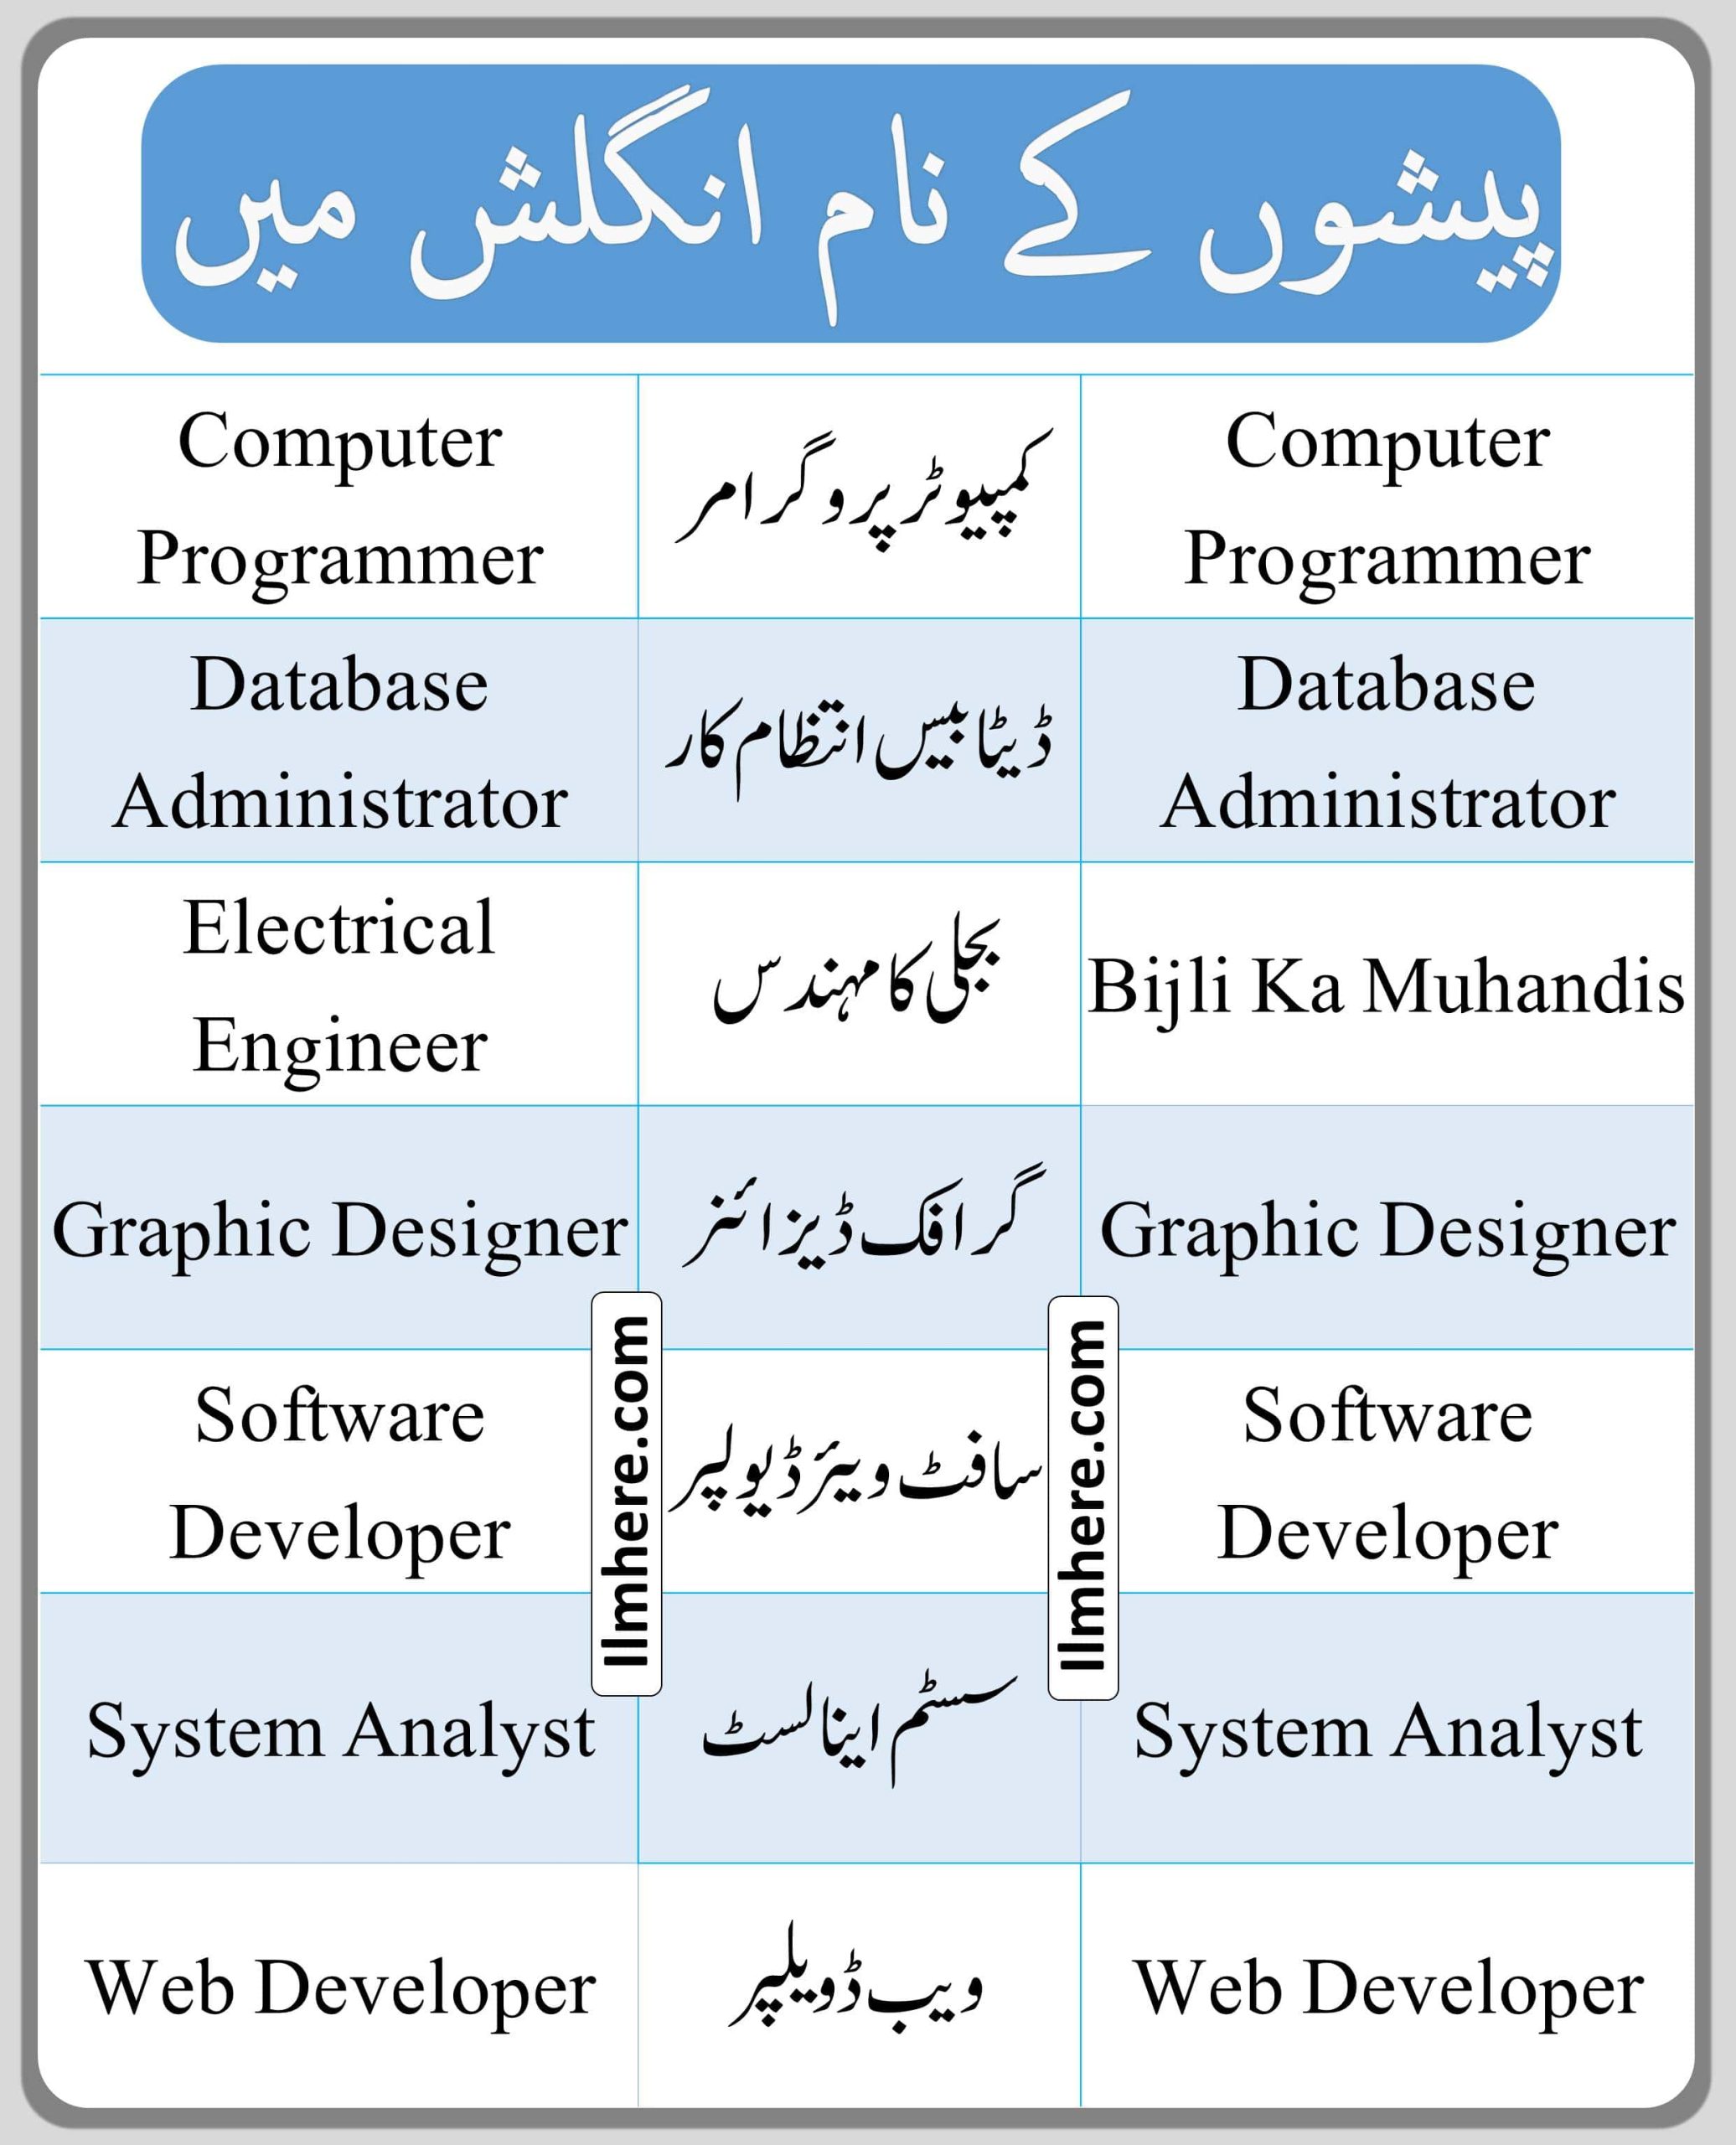 Occupations Names related to IT and engineering